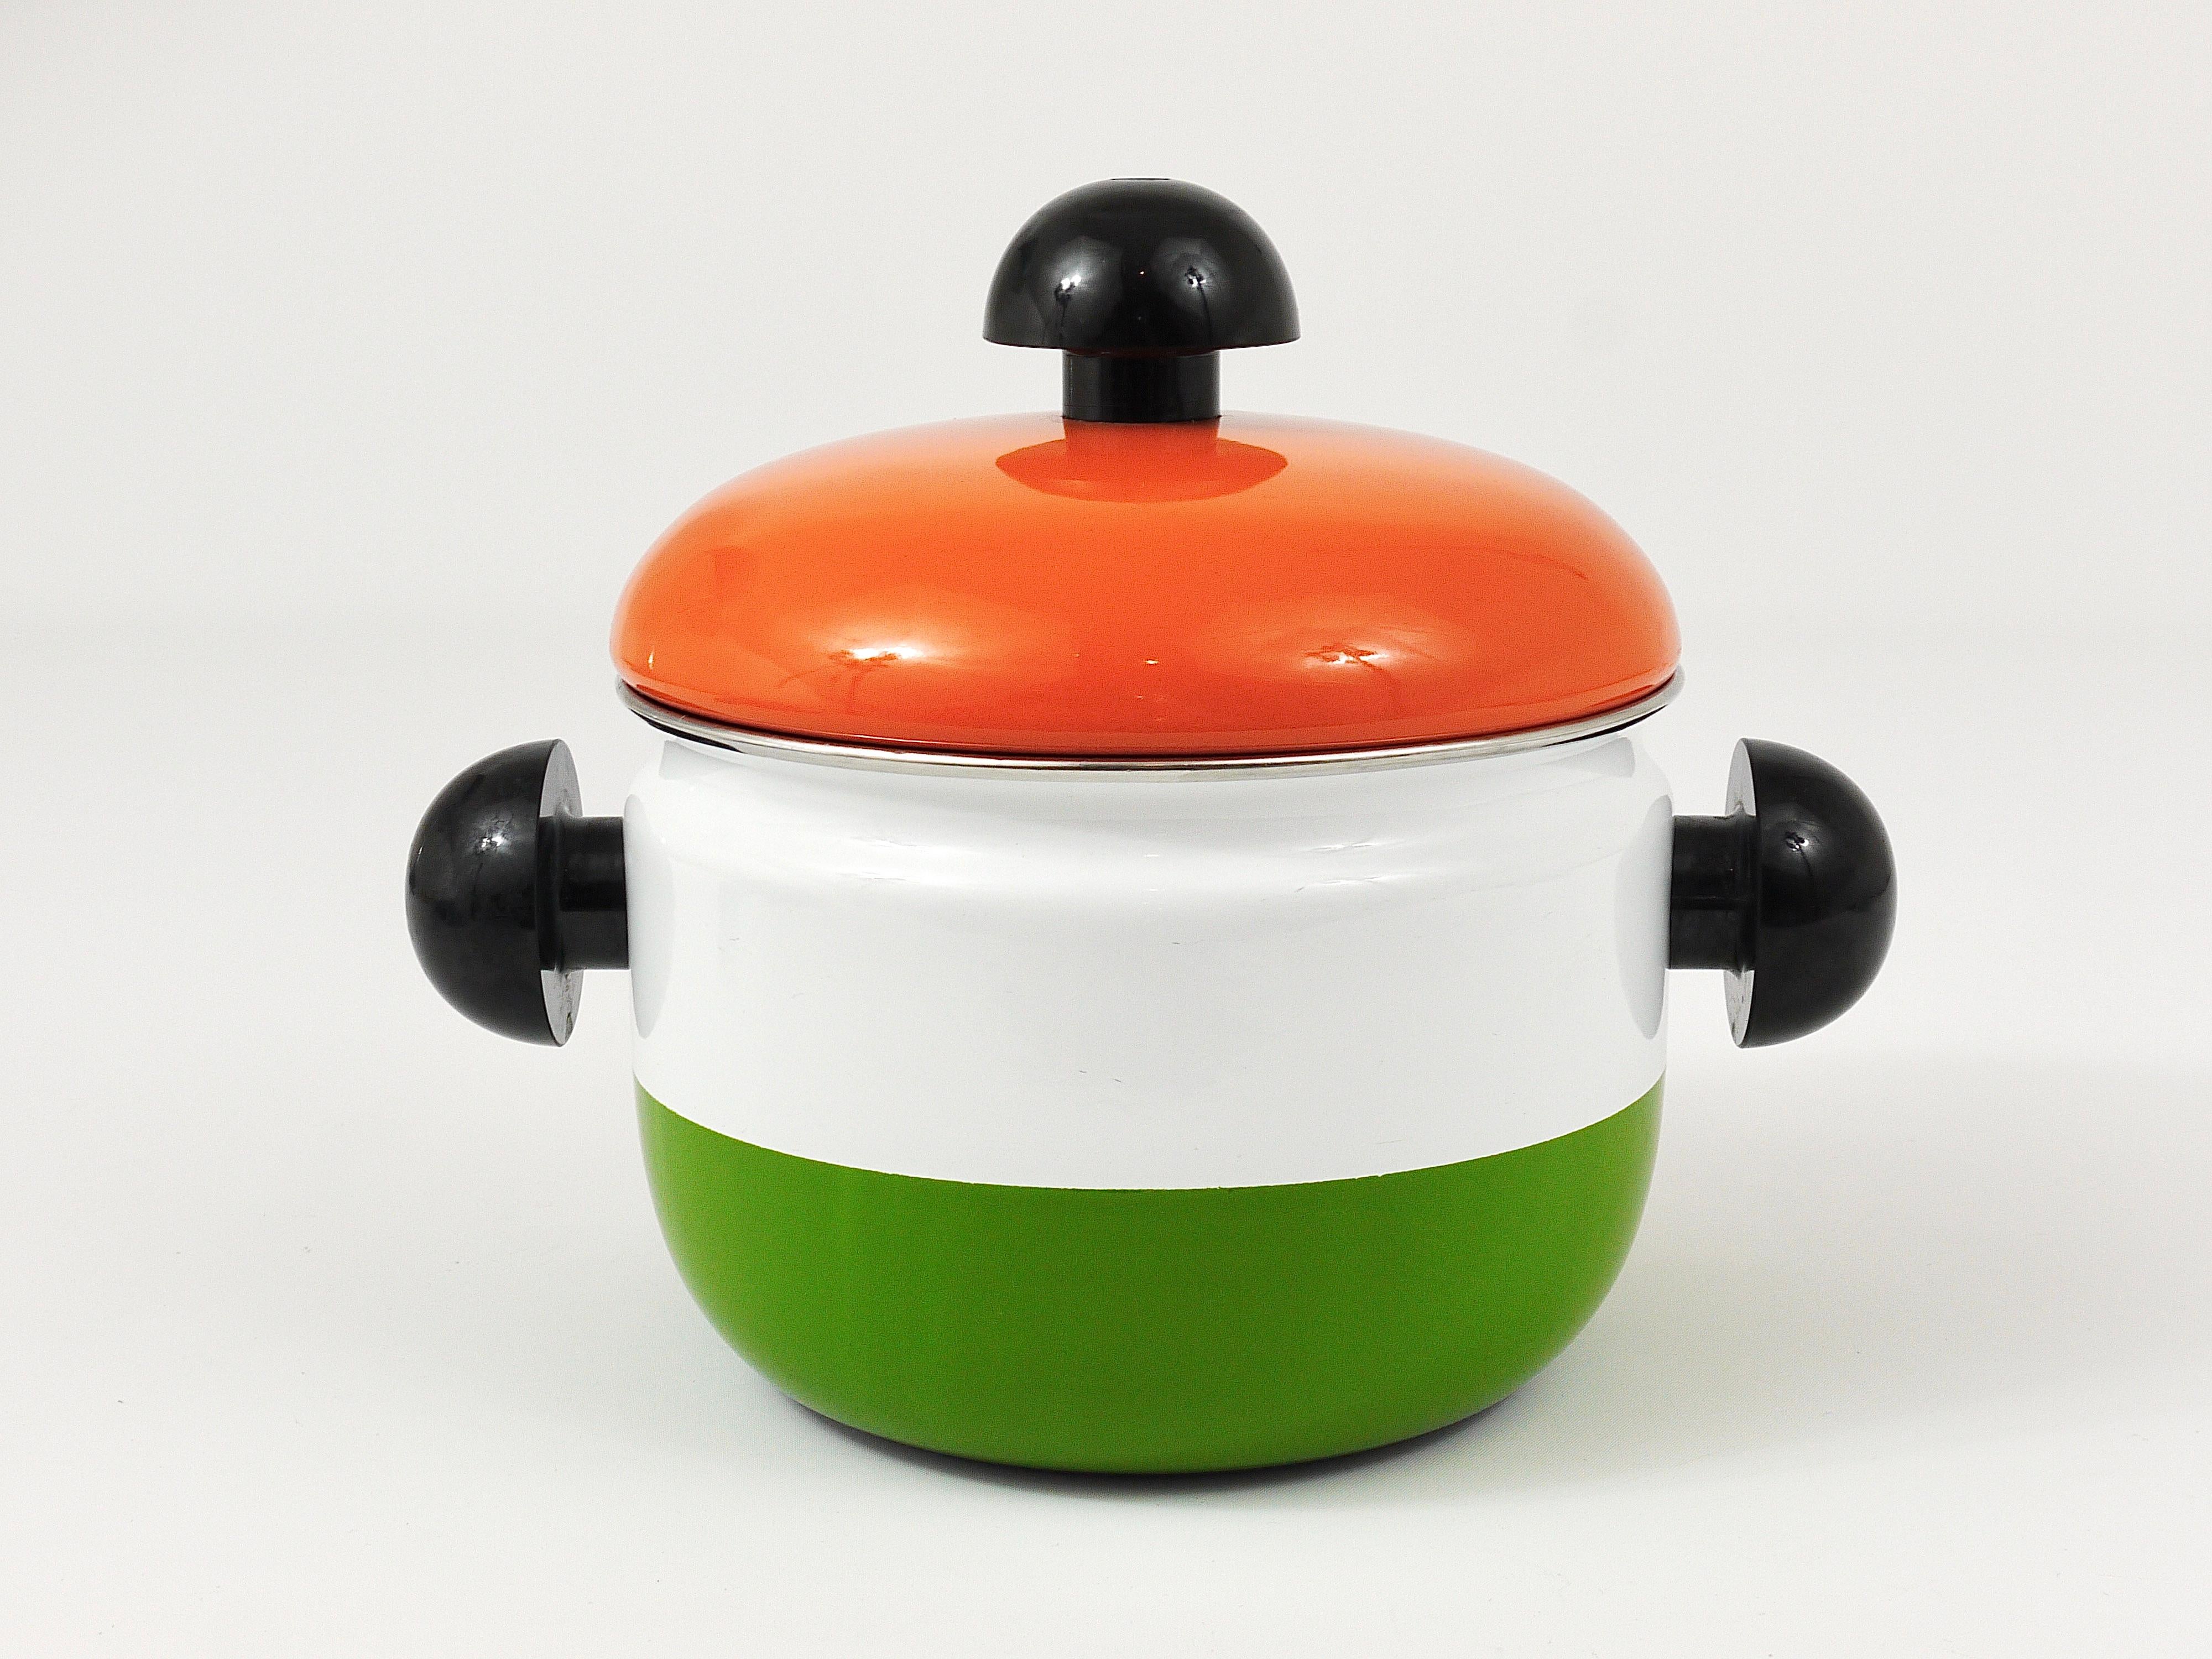 Carl Aubock Enameled Pot with Lid by Riess, Orange, White, Green, Austria, 1970s For Sale 1